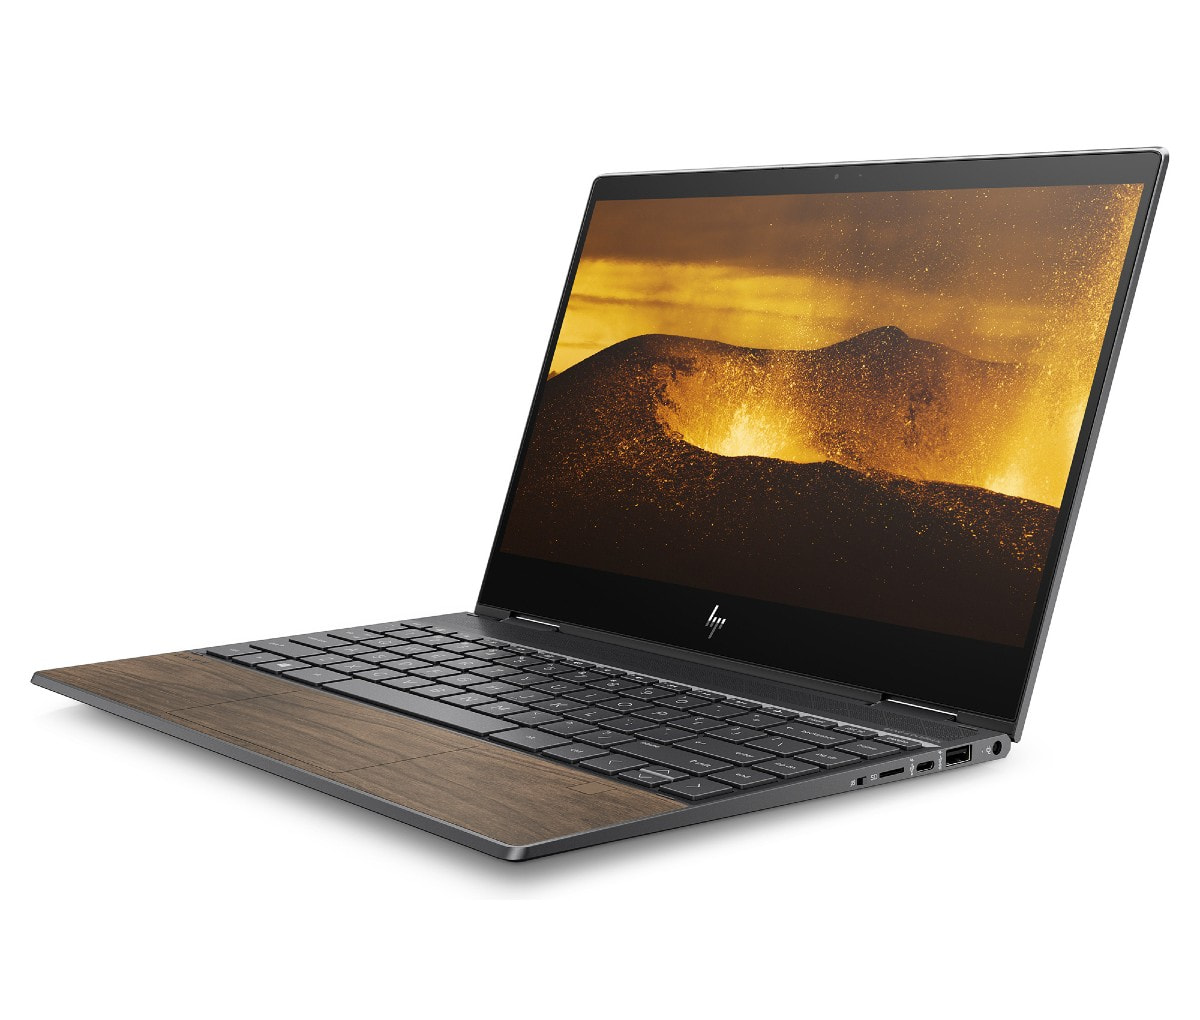 「ENVY 13 x360」「ENVY 15 x360」HPのWin10搭載回転式2-in-1、パームレスト部分に天然木材採用